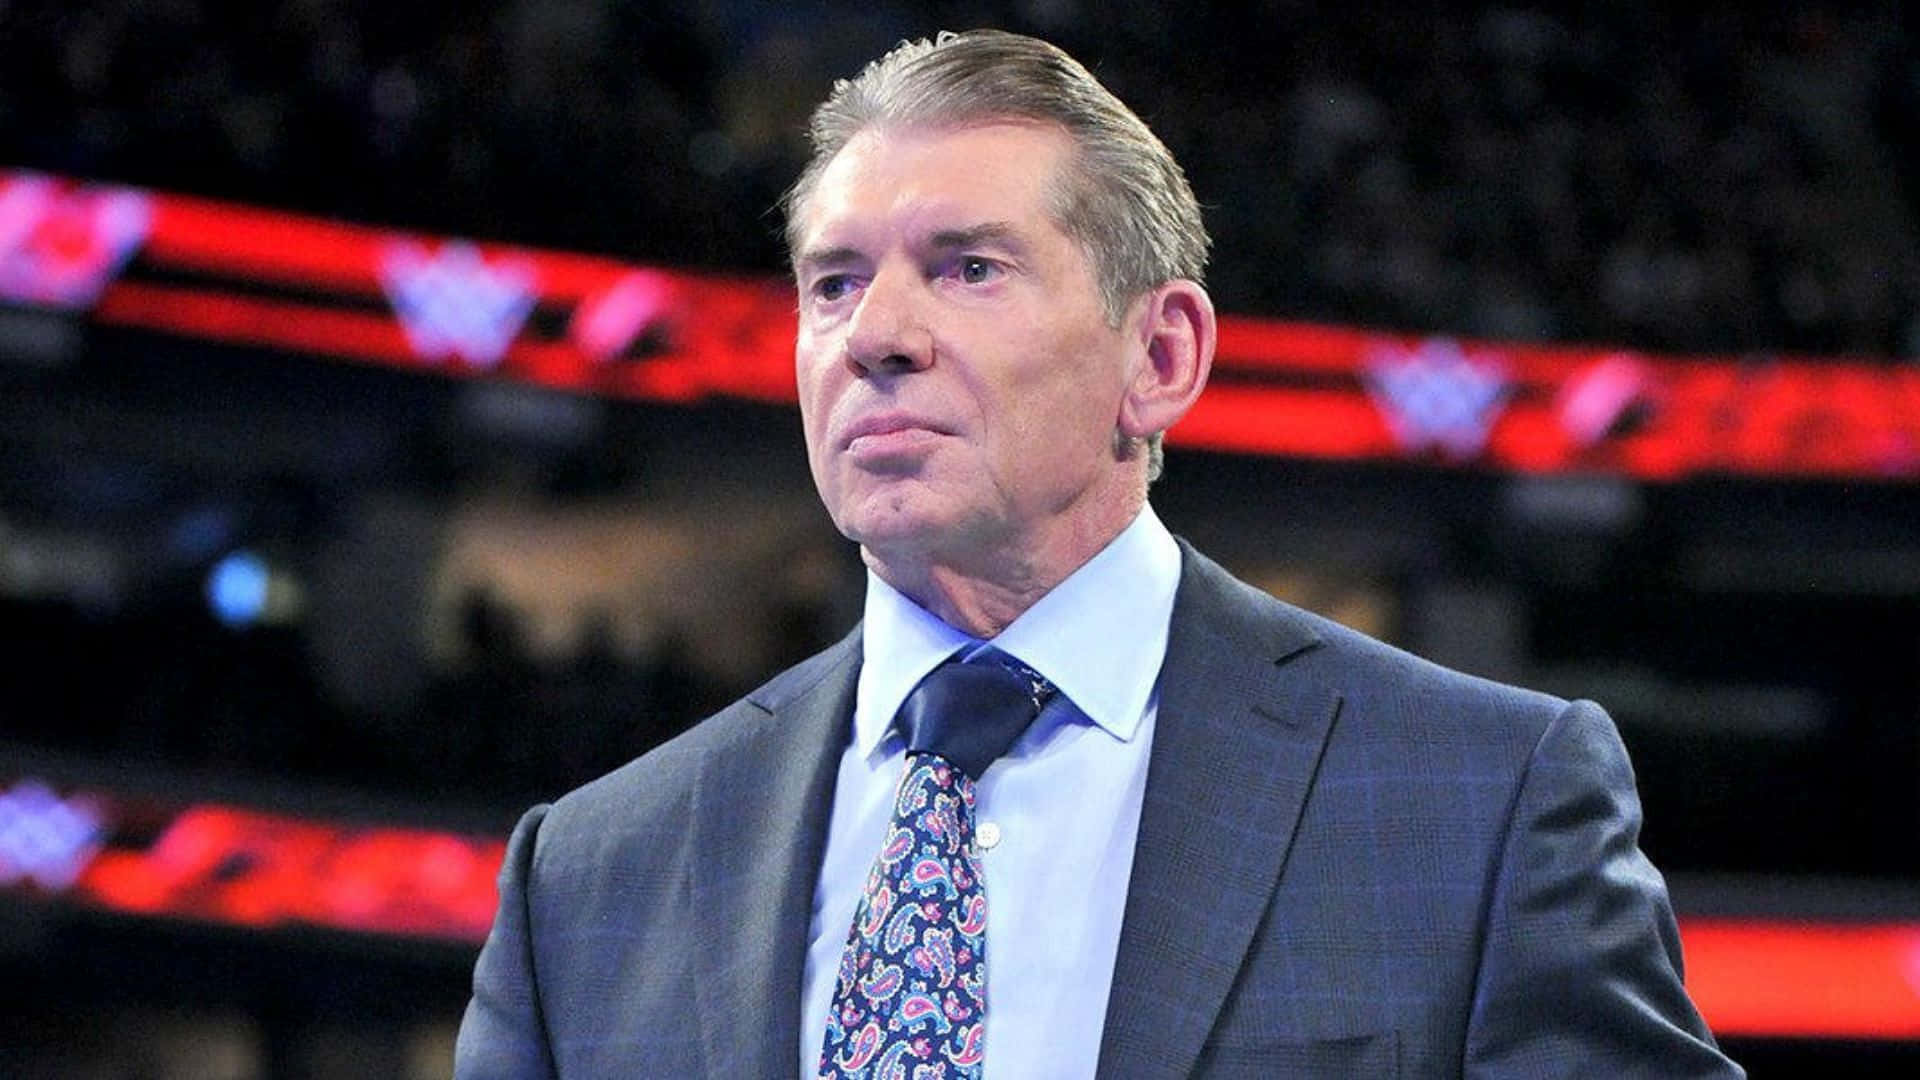 Wwe Commentator Vince Mcmahon Inside The Ring Background